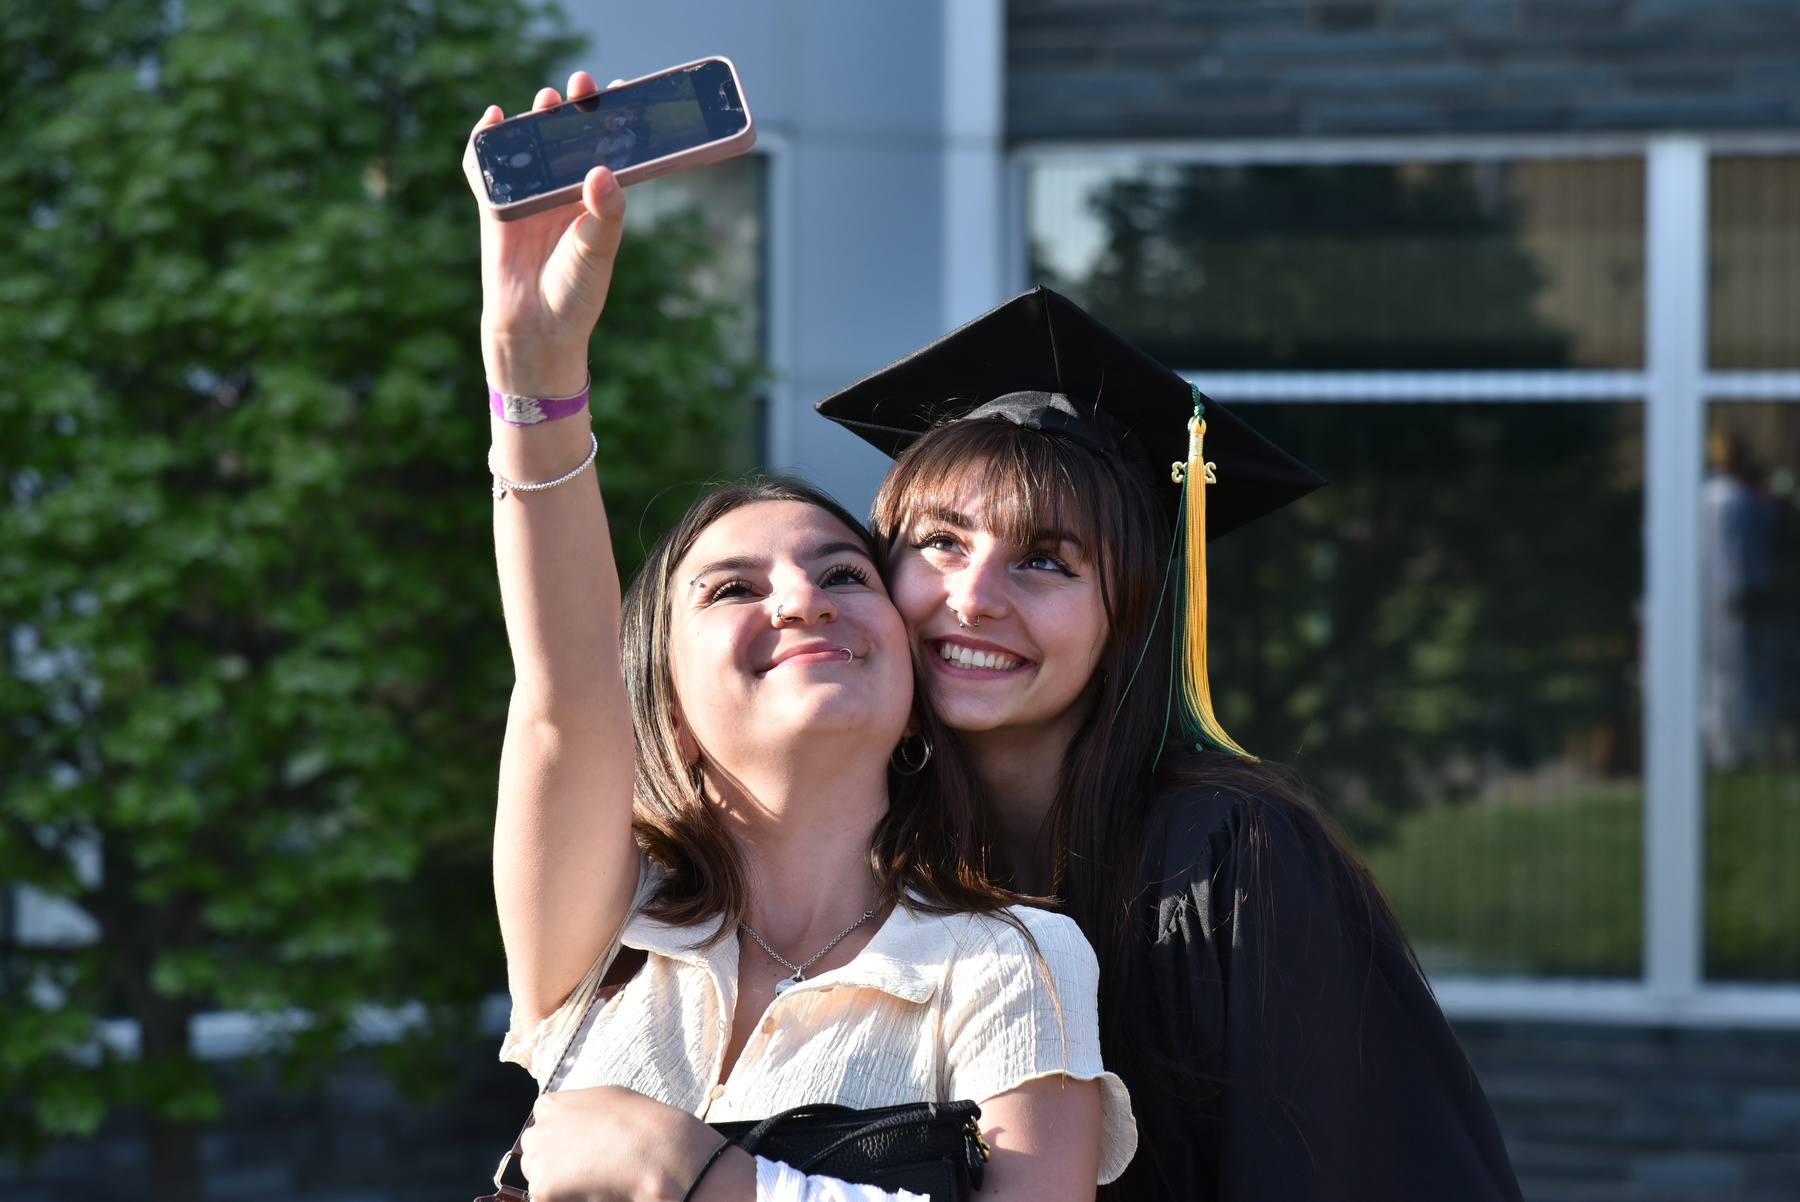 Graduates gathered with their families and friends for celebrations and photos after the 4 p.m. School of Communication, Media and the Arts and the School of Education Commencement ceremony.